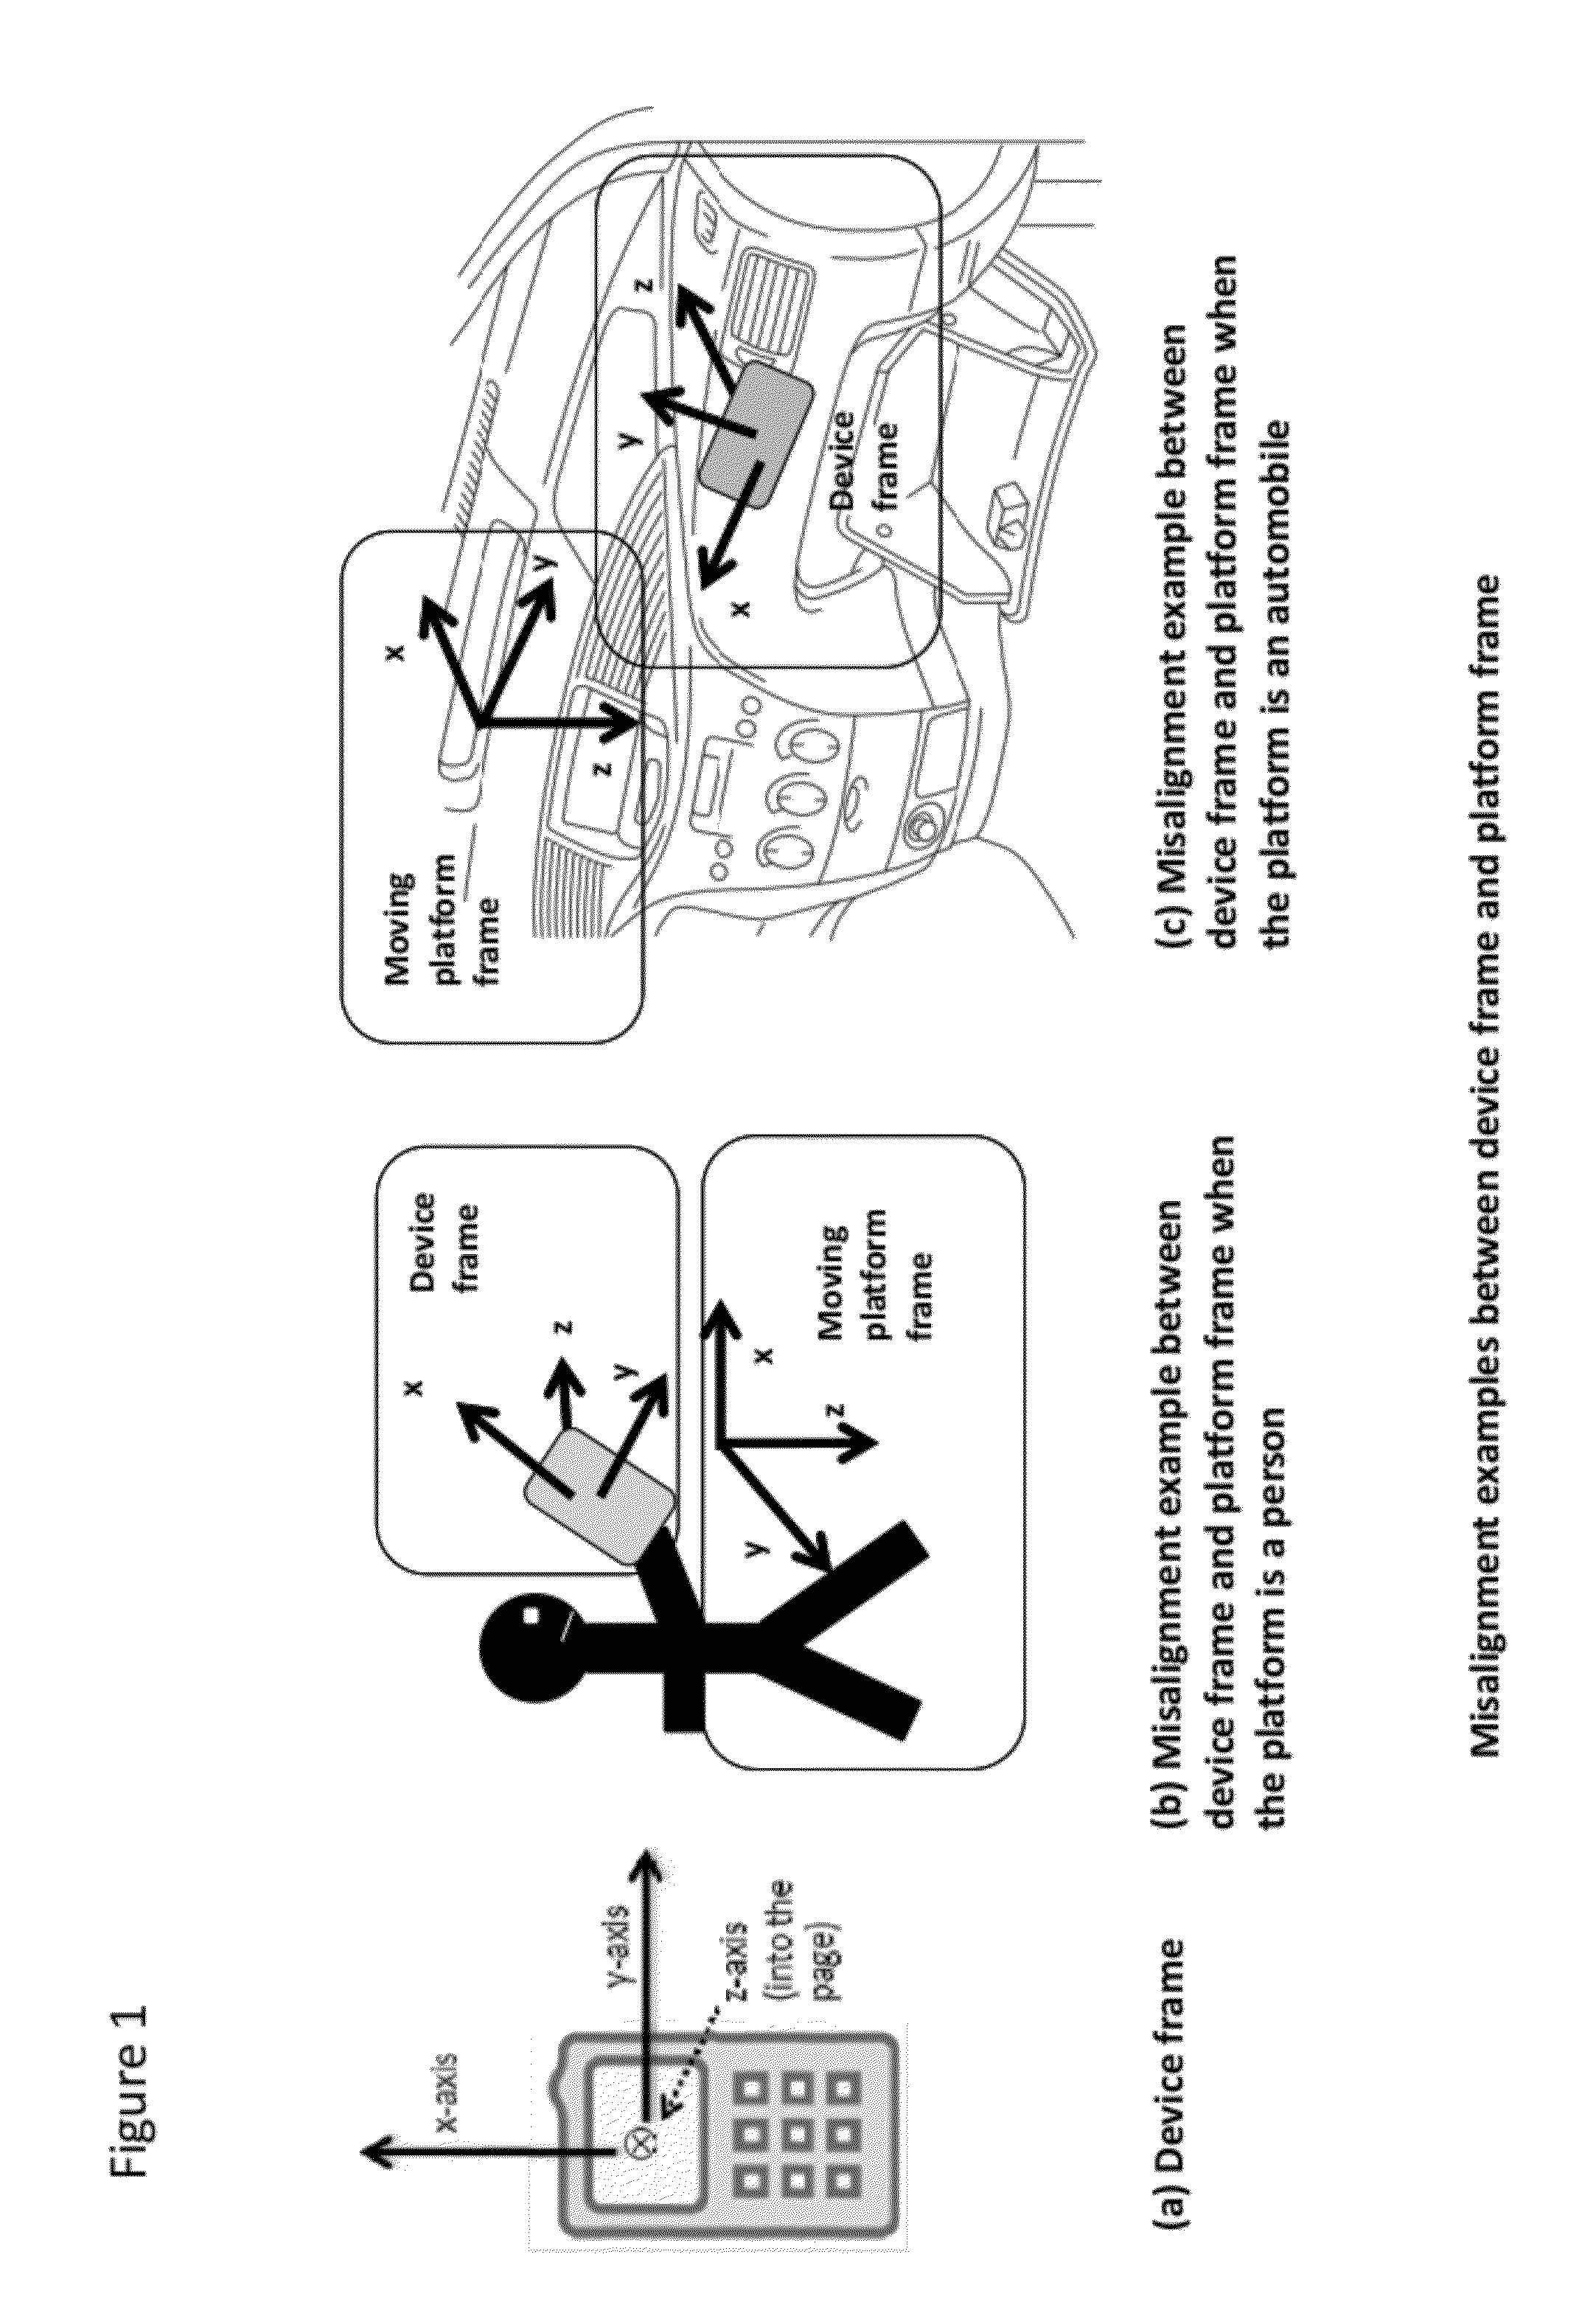 Methods of attitude and misalignment estimation for constraint free portable navigation